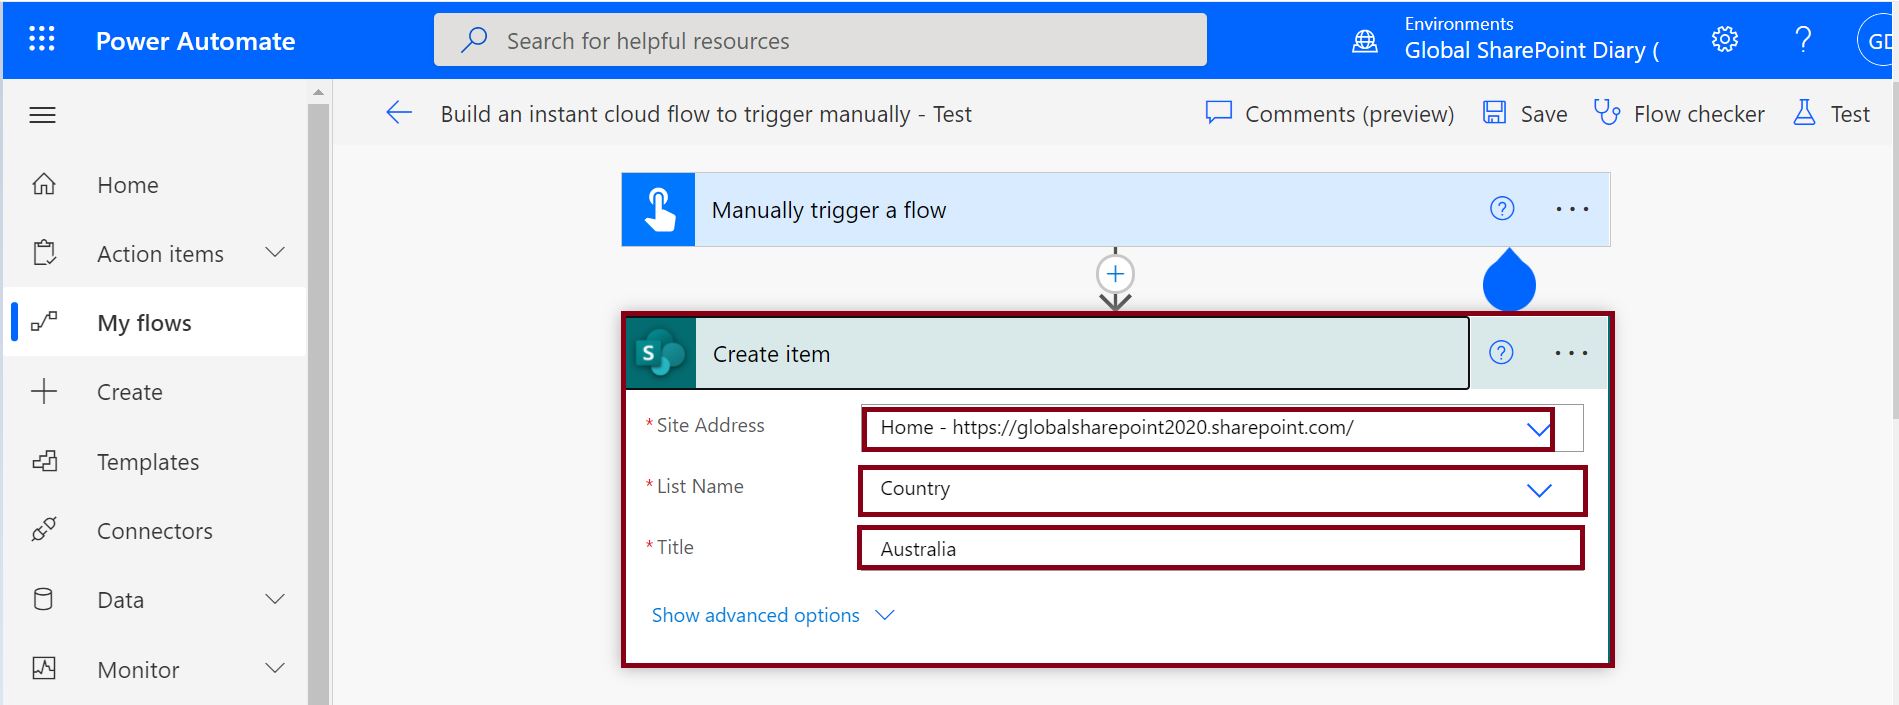 Manually trigger a flow - create item in SharePoint list